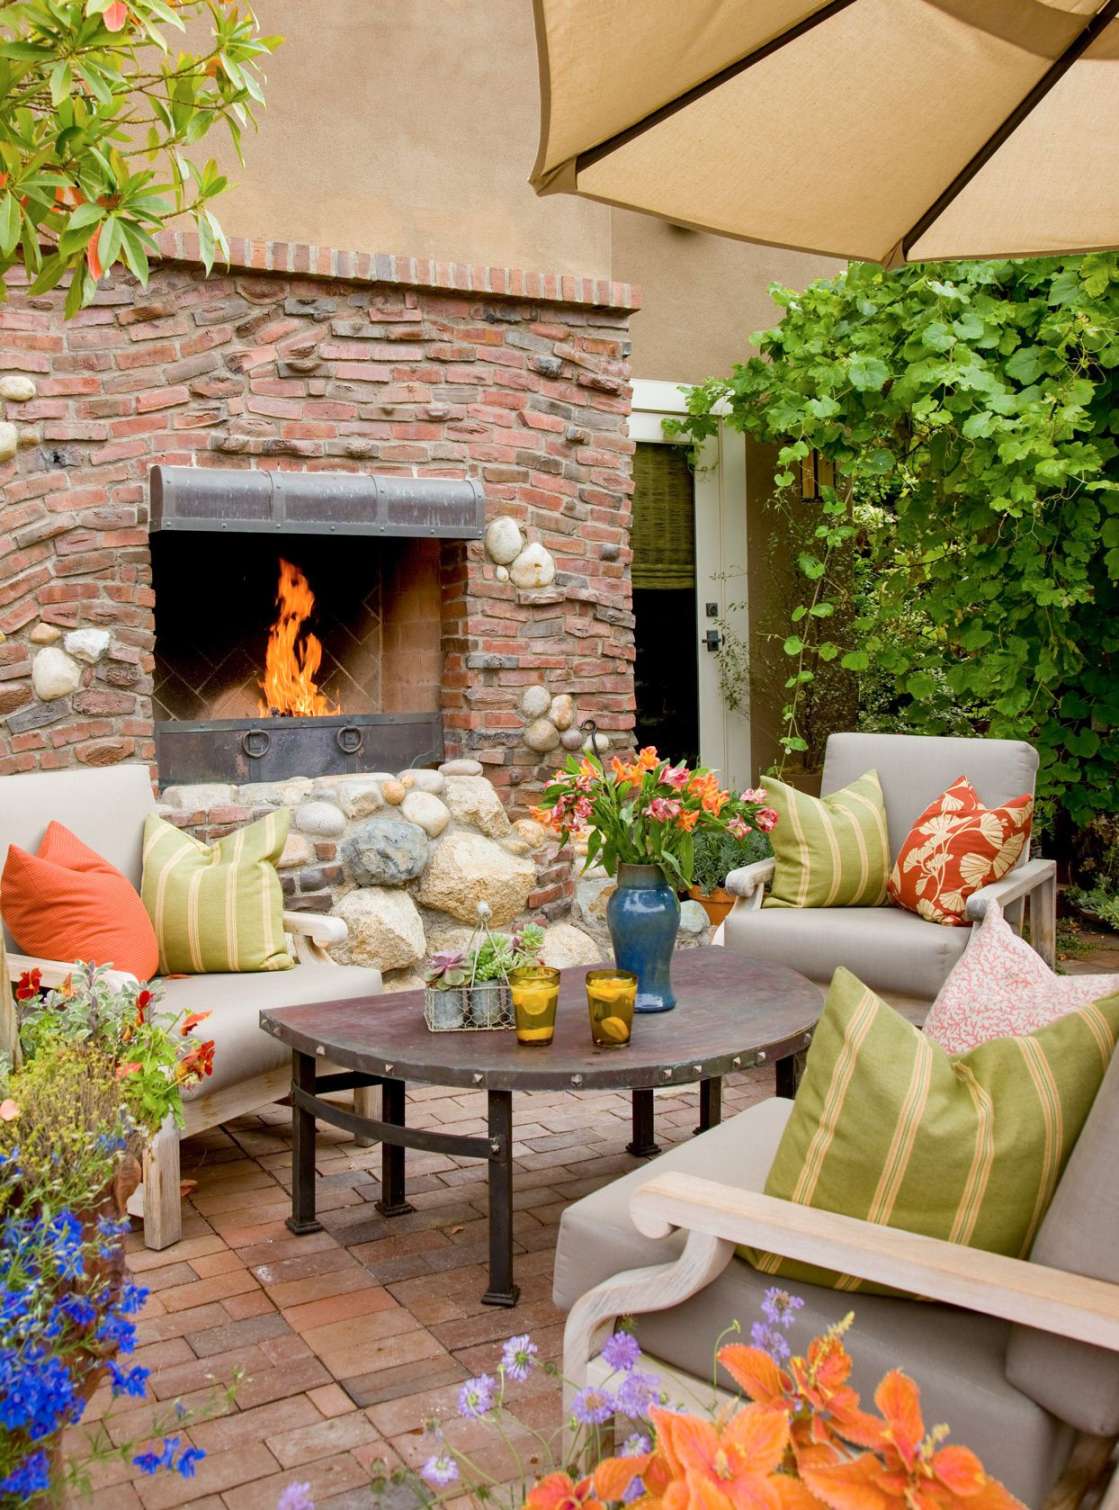 Cozy Outdoor Fireplace Ideas for a Cool-Weather Hangout Space